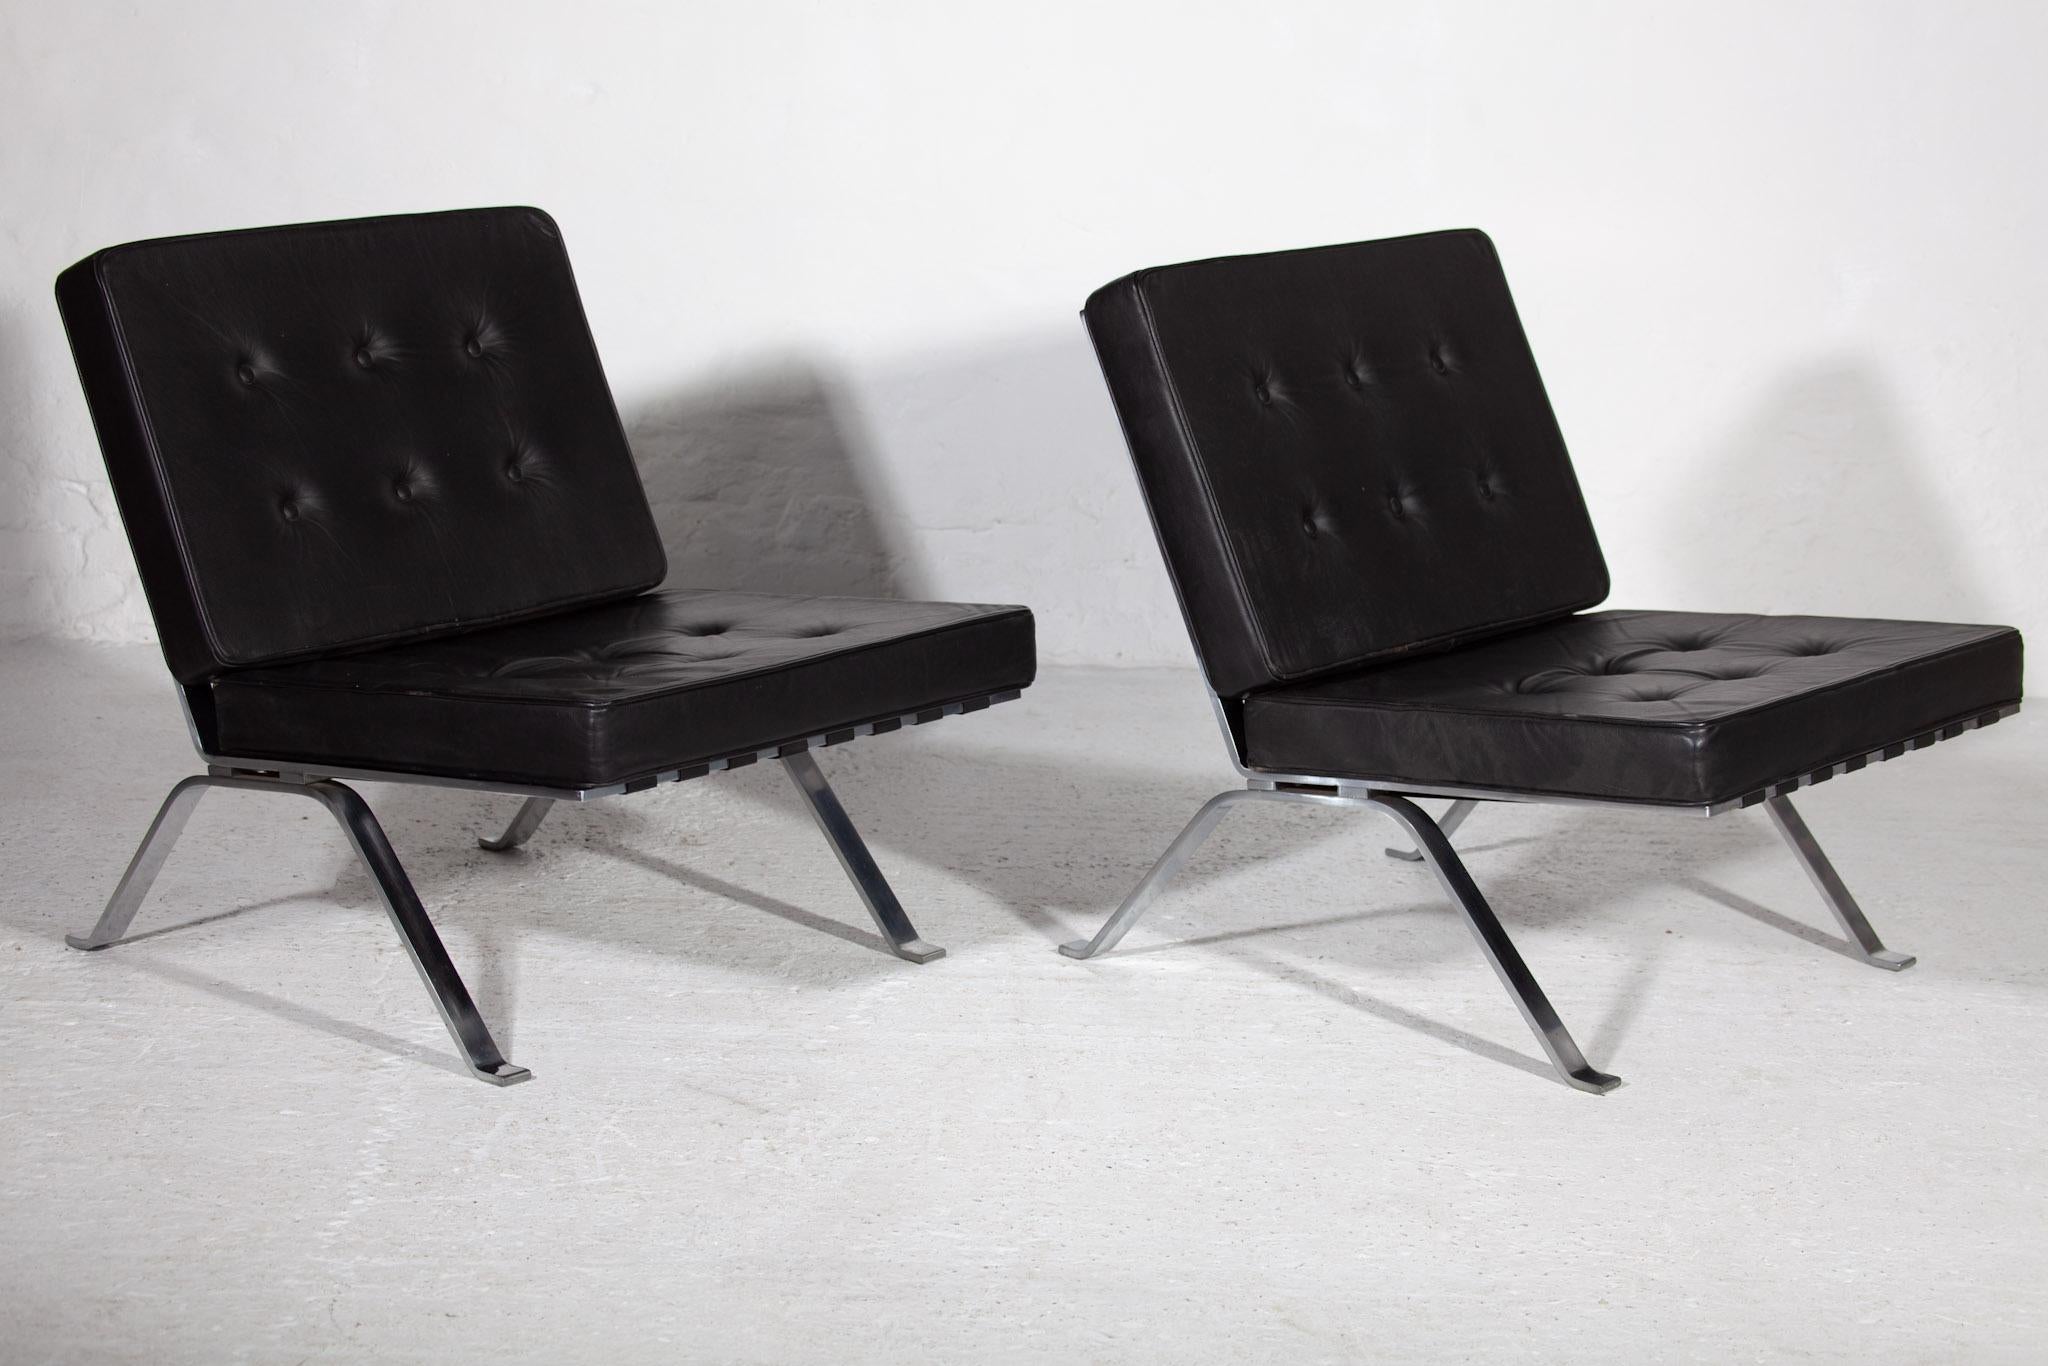 Hand-Crafted Set of Two Black Leather Lounge Chairs by Hans Eichenberger for Girsberg, 1966